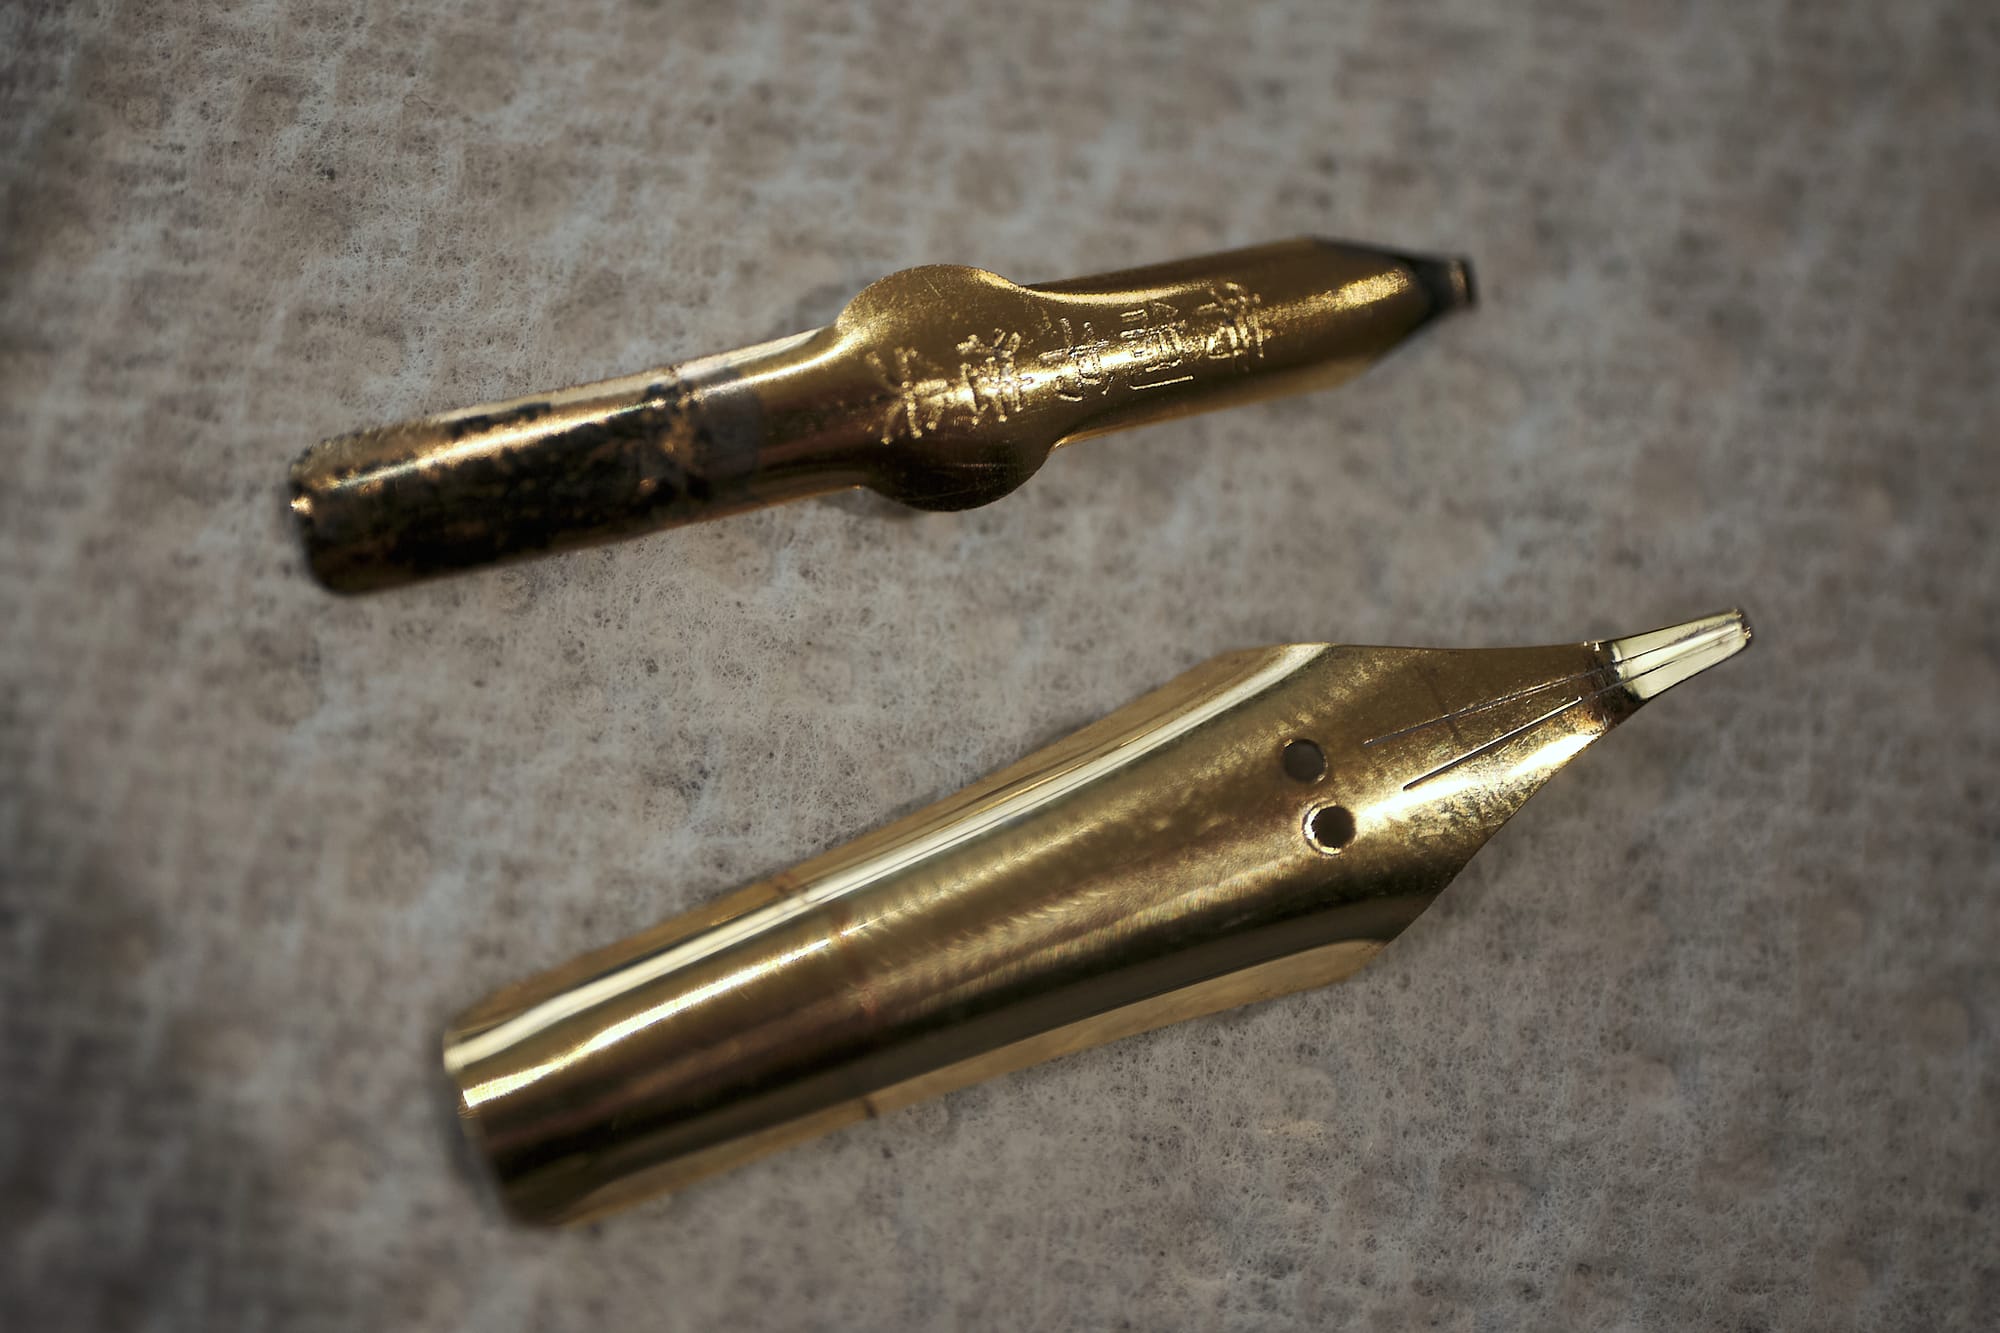 Photo of the nib & overfeed after being removed while cleaning.